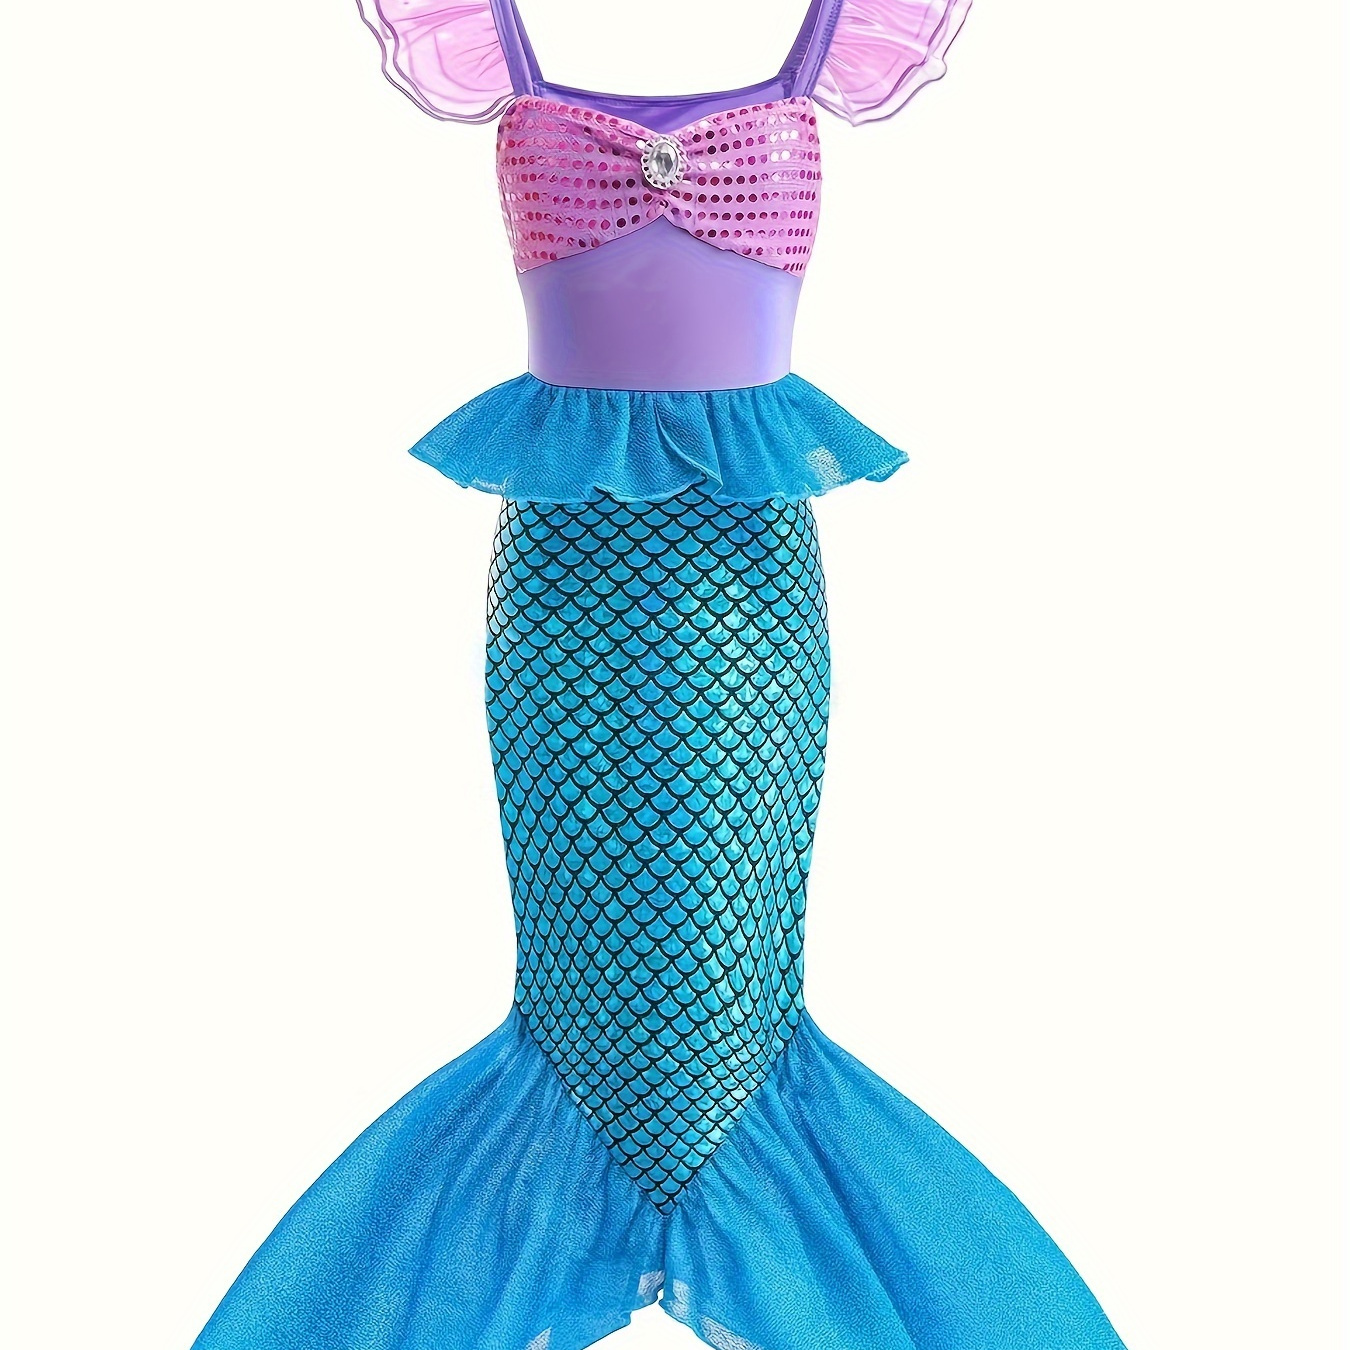 

Mermaid Inspired Girls Contrast Mesh Fishtail Princess Dress - Ideal For Halloween Party Birthday Fancy Dressed-up Performance